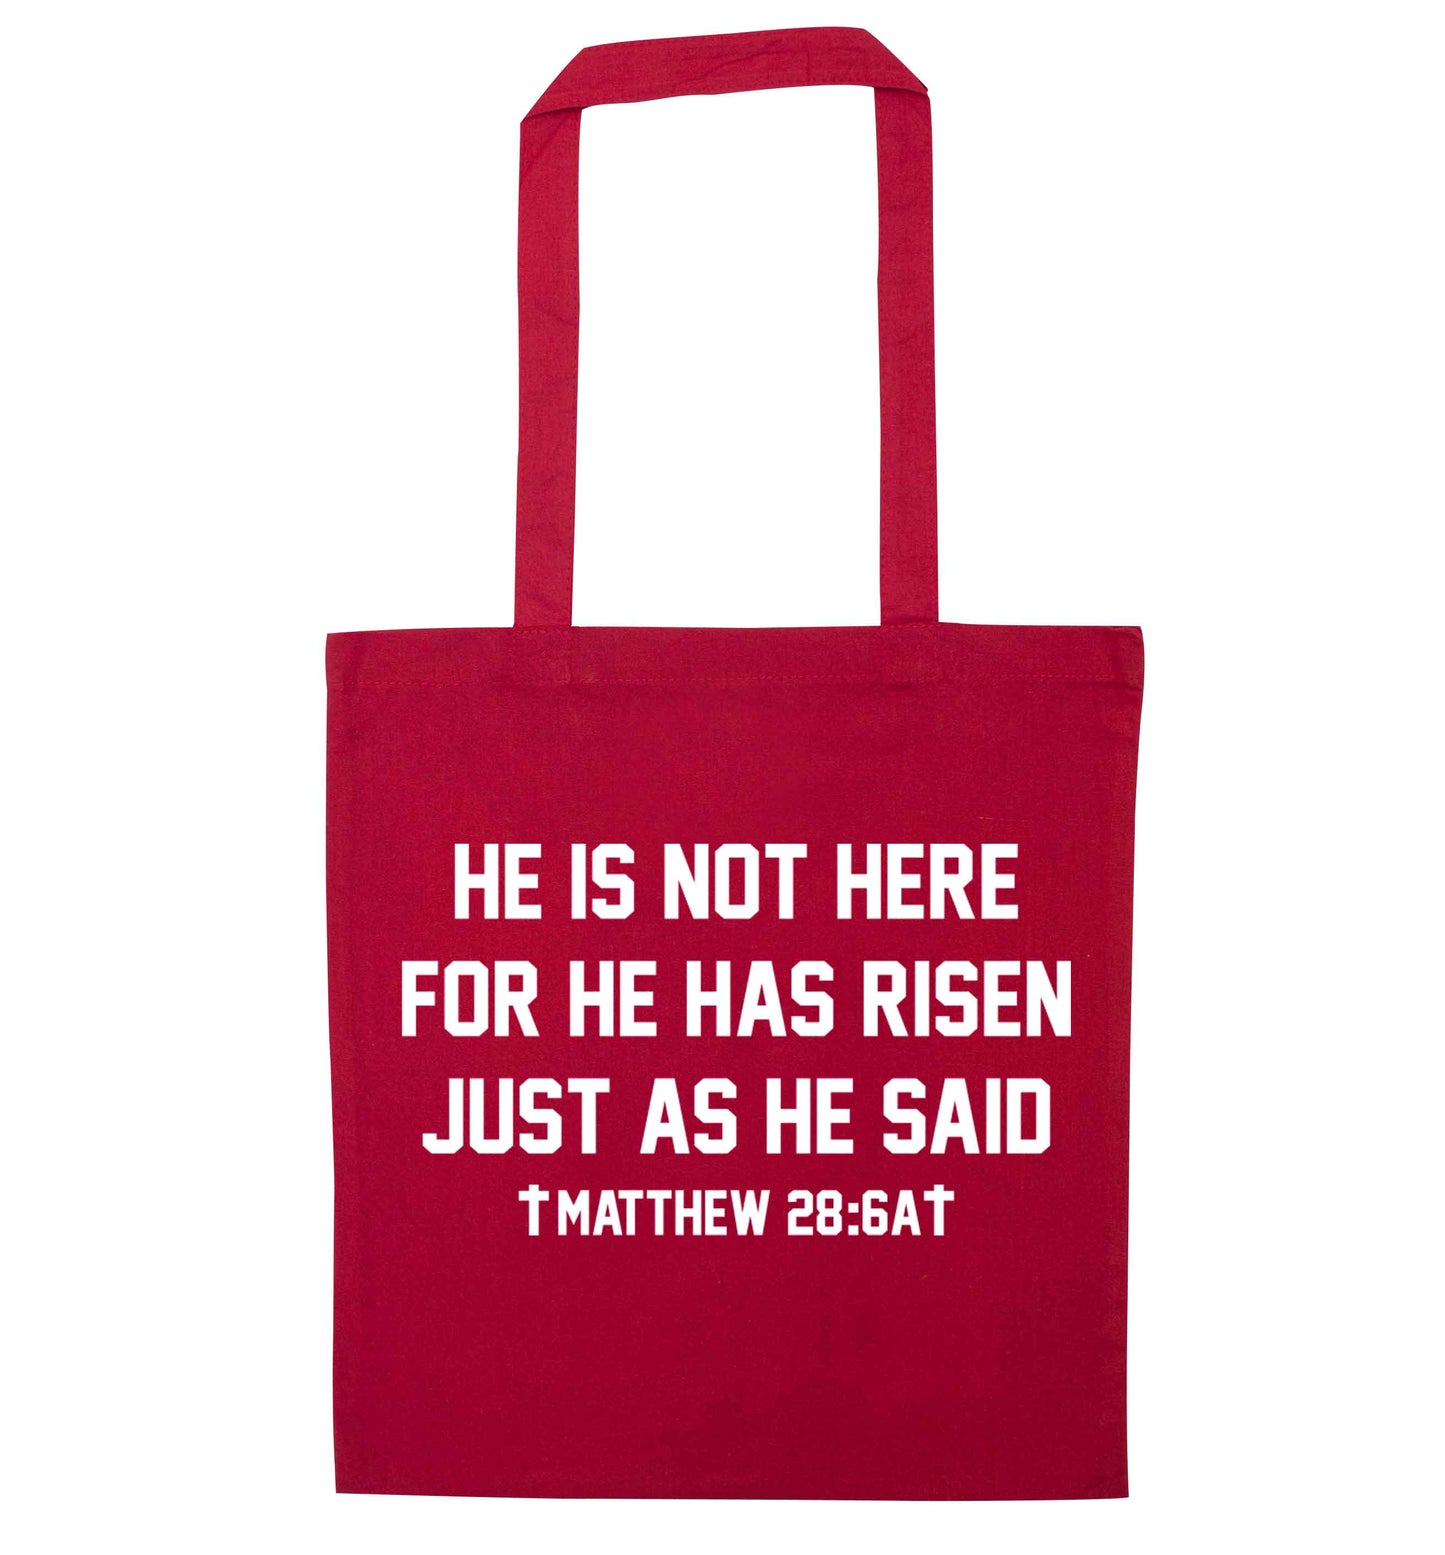 He is not here for he has risen just as he said matthew 28:6A red tote bag